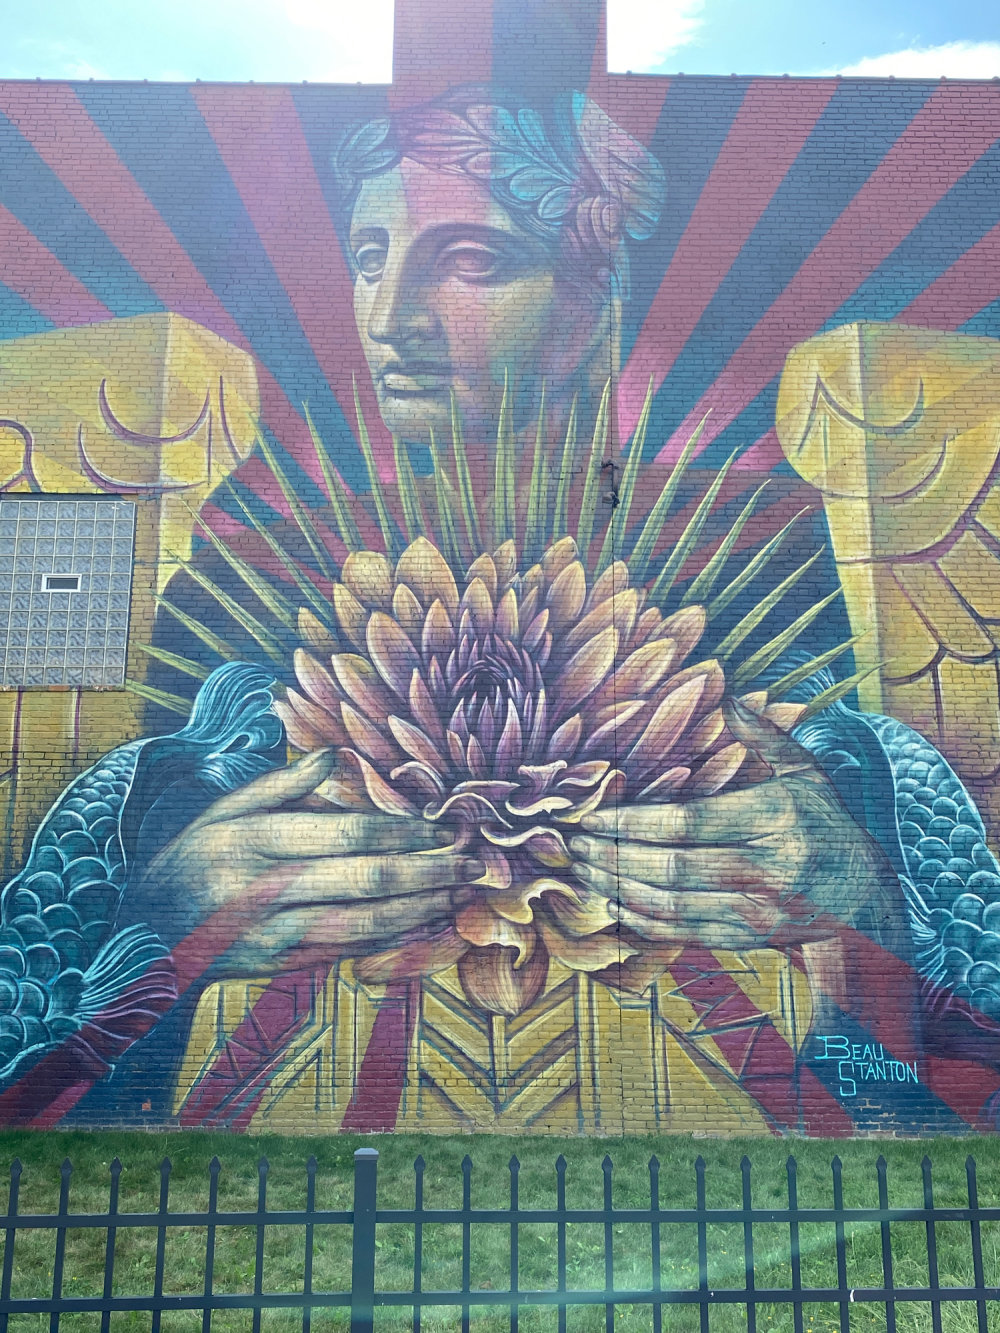 mural in Cleveland by artist Beau Stanton.